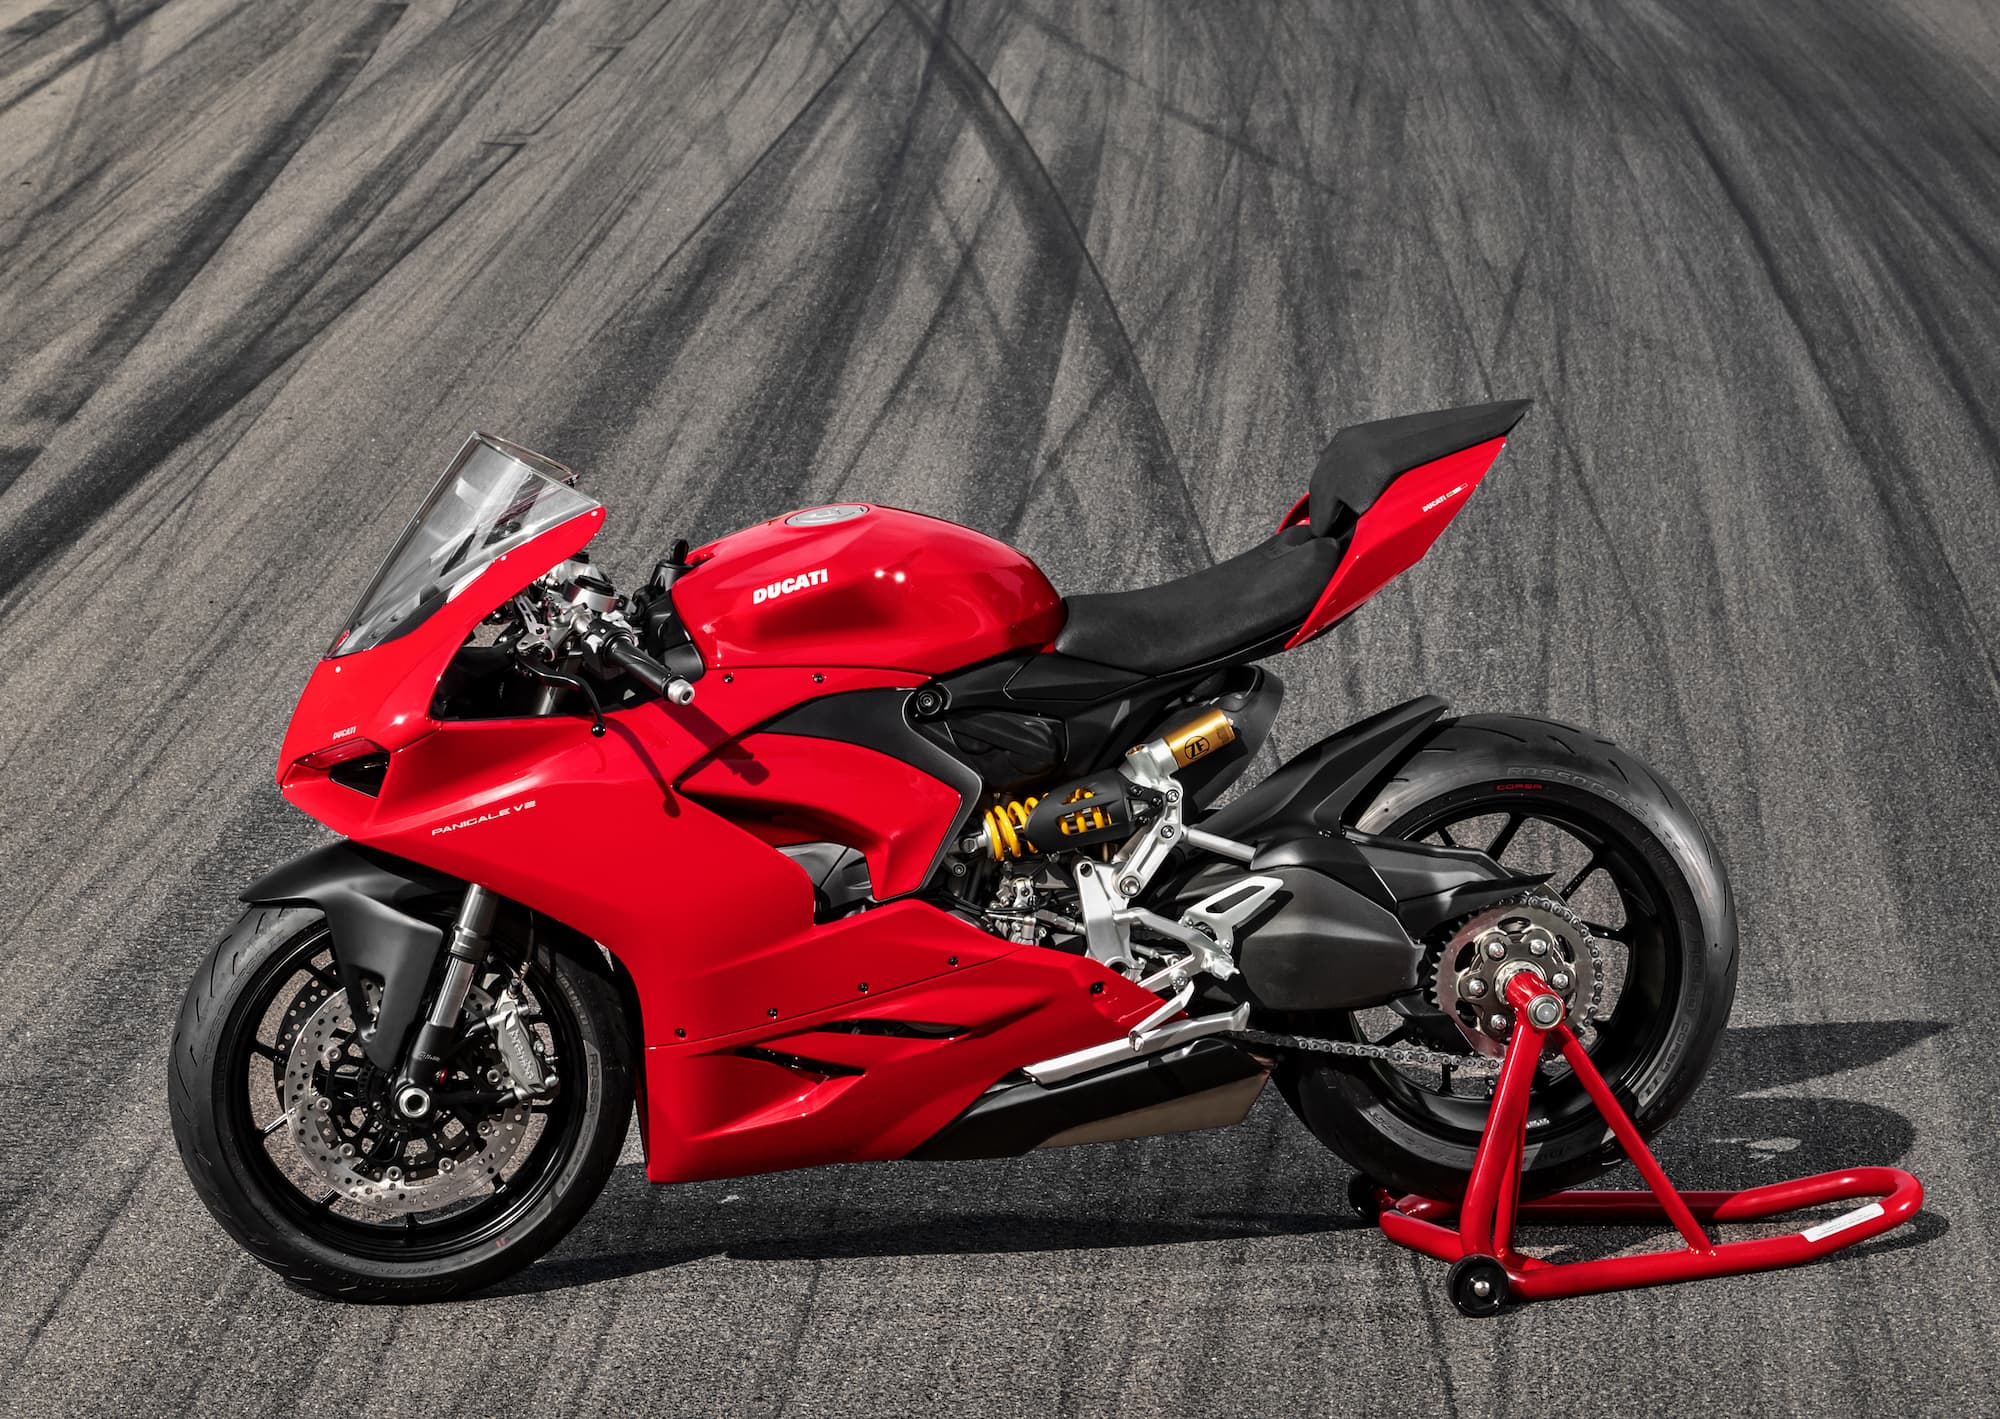 Ducati Panigale V2 LHS on track